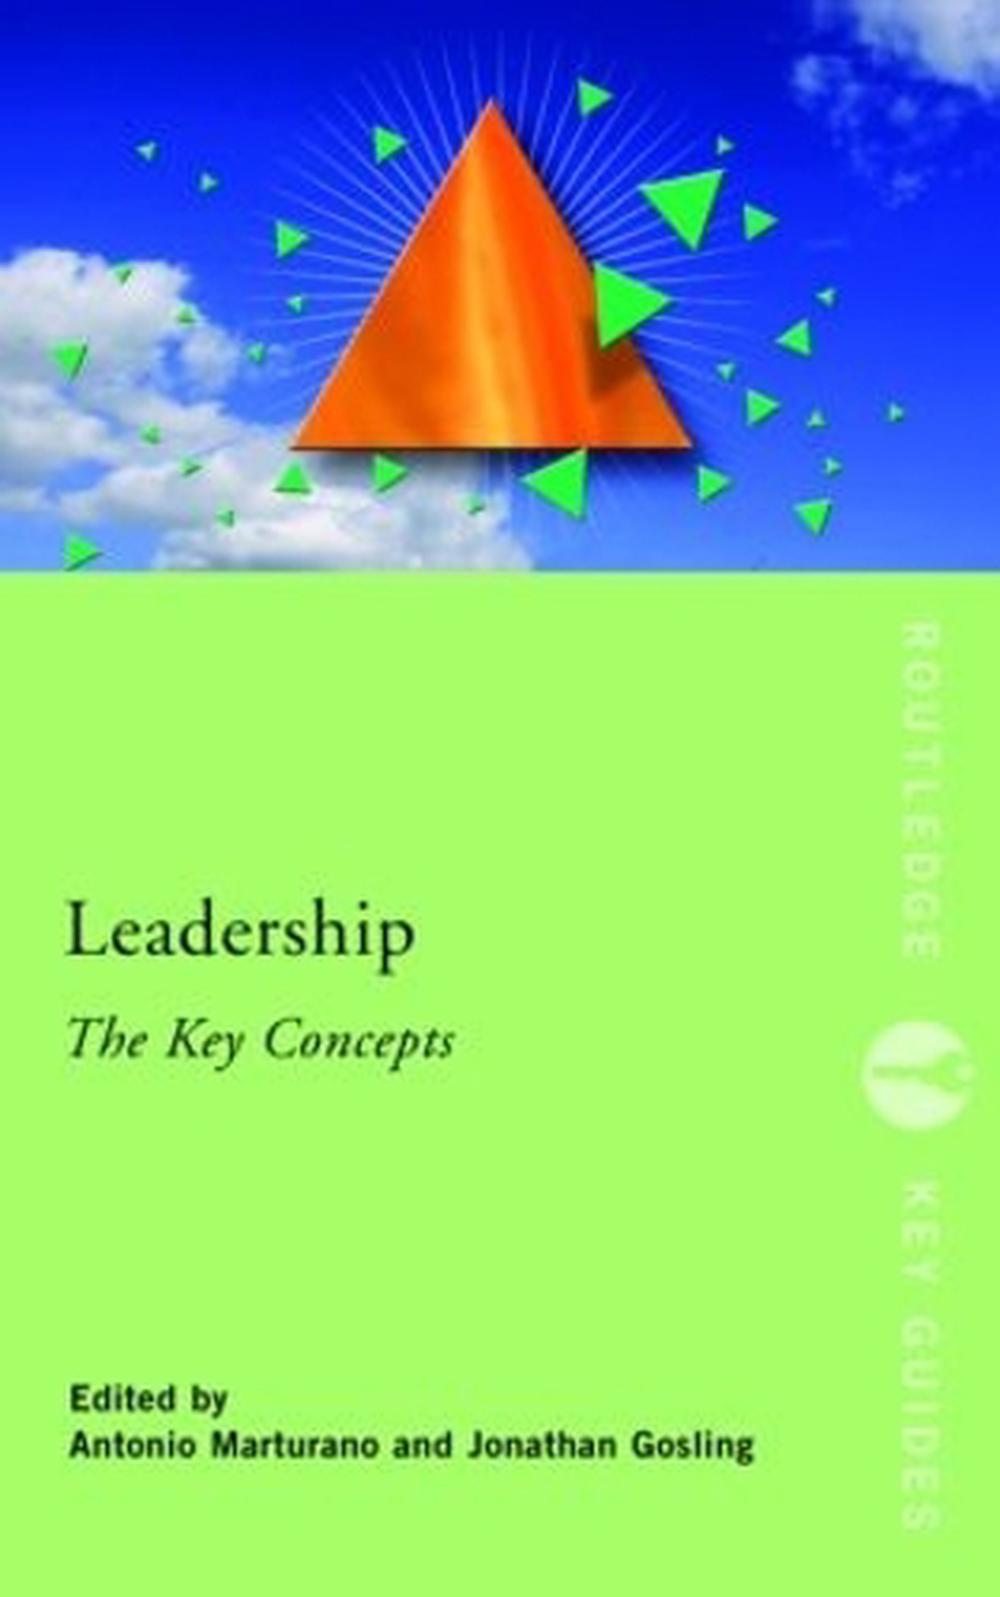 Leadership: The Key Concepts by Anto Marturano, Paperback ...